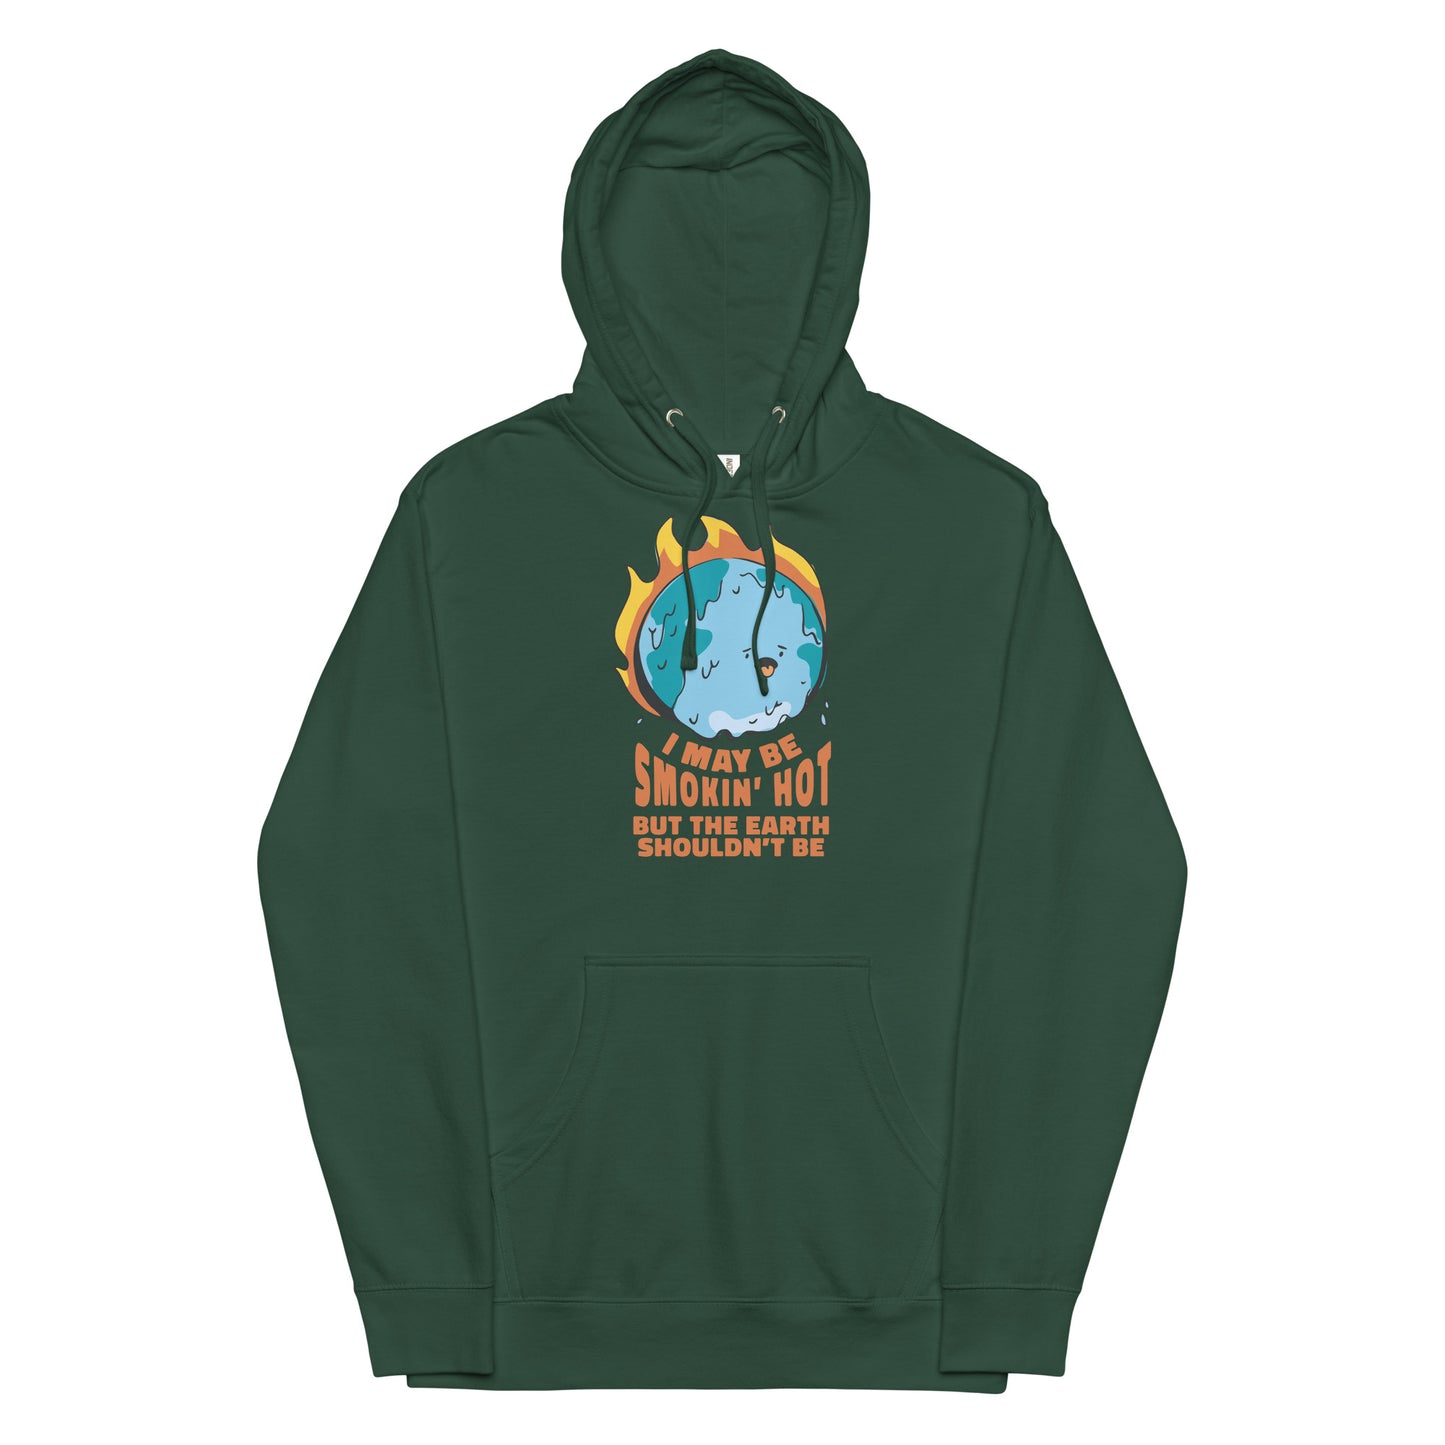 I May Be Smokin' Hot But the Earth Shouldn't Be Unisex hoodie